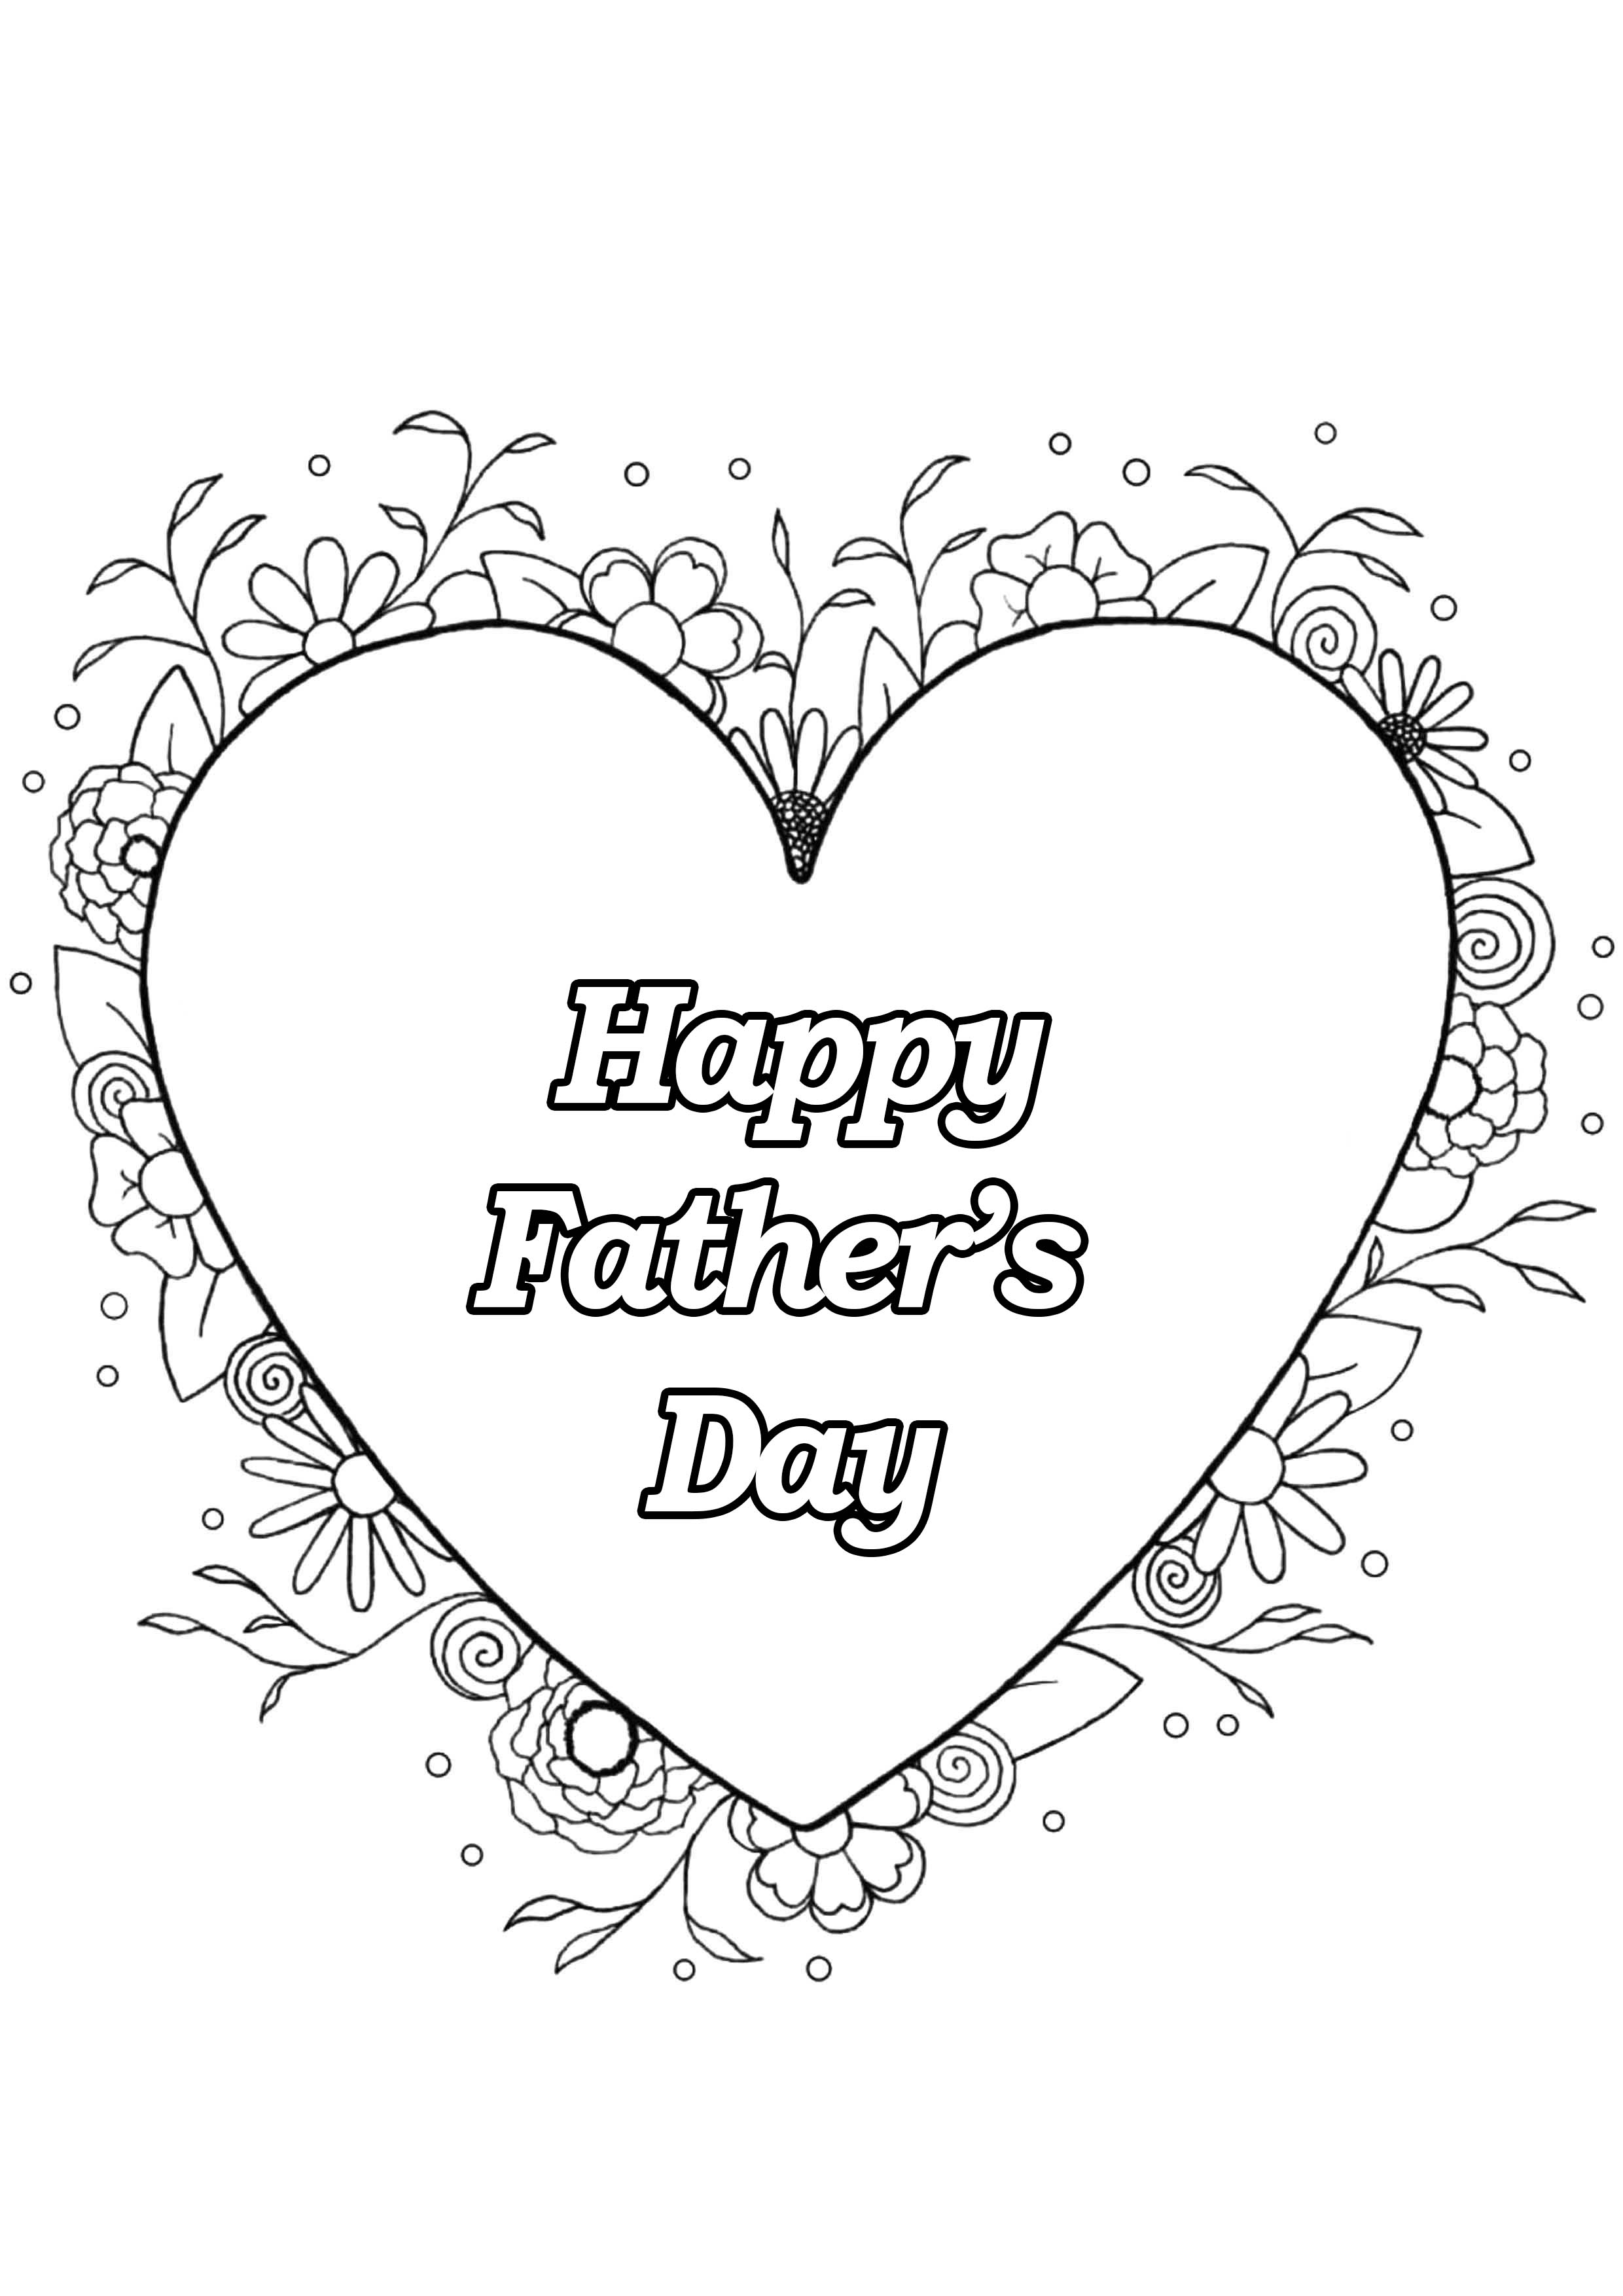 Download Father s day 4 - Father's Day Adult Coloring Pages